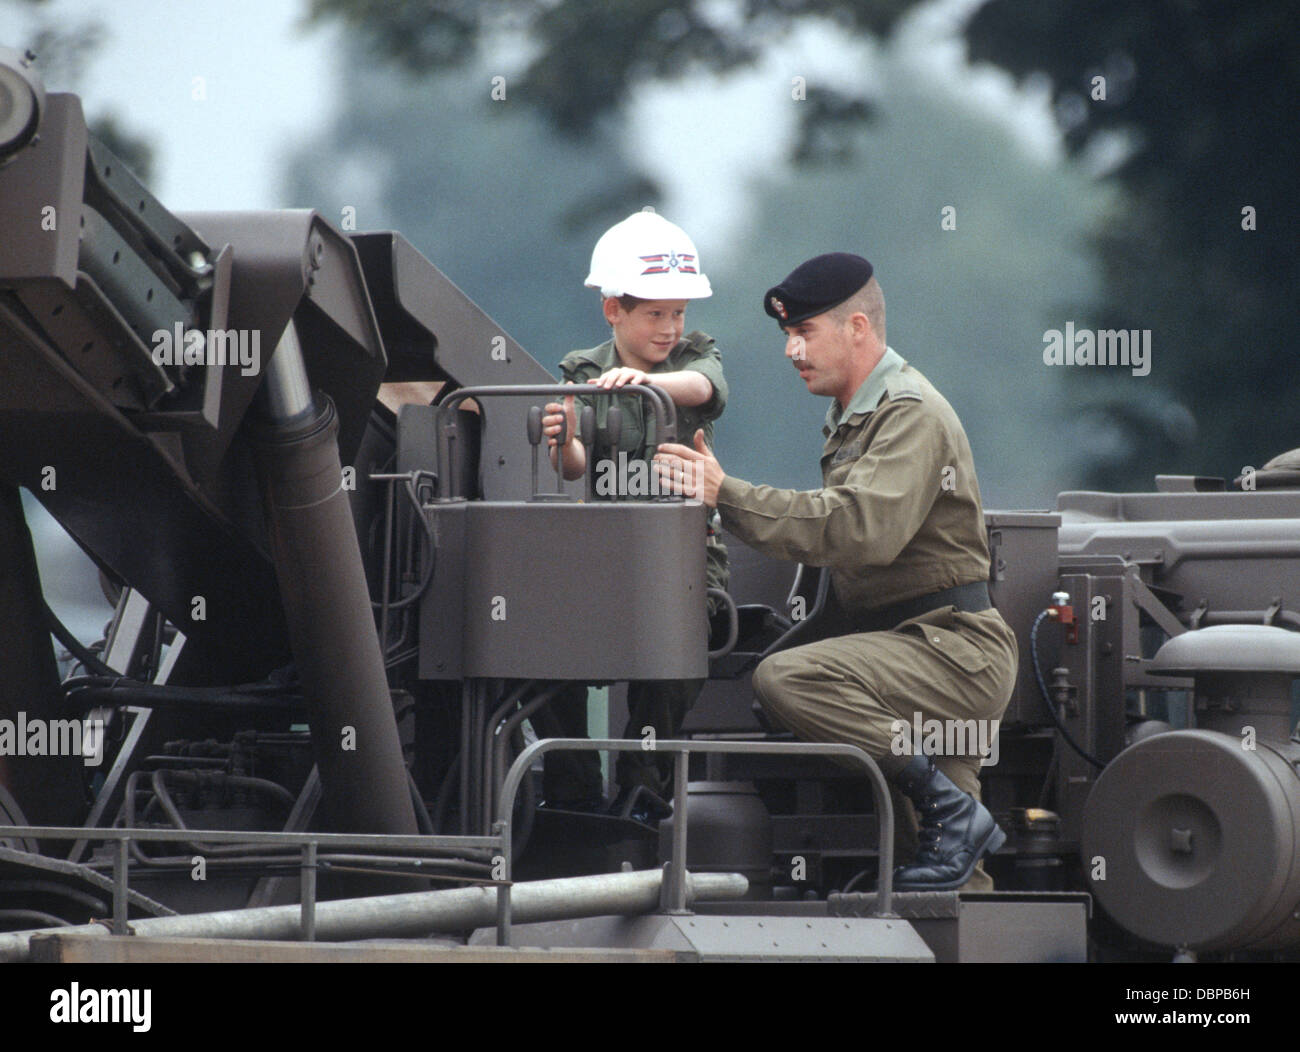 HRH Prince Harry operates a crane during his visit to the British Army at Bergen-Hohne, Germany July 1993 Stock Photo